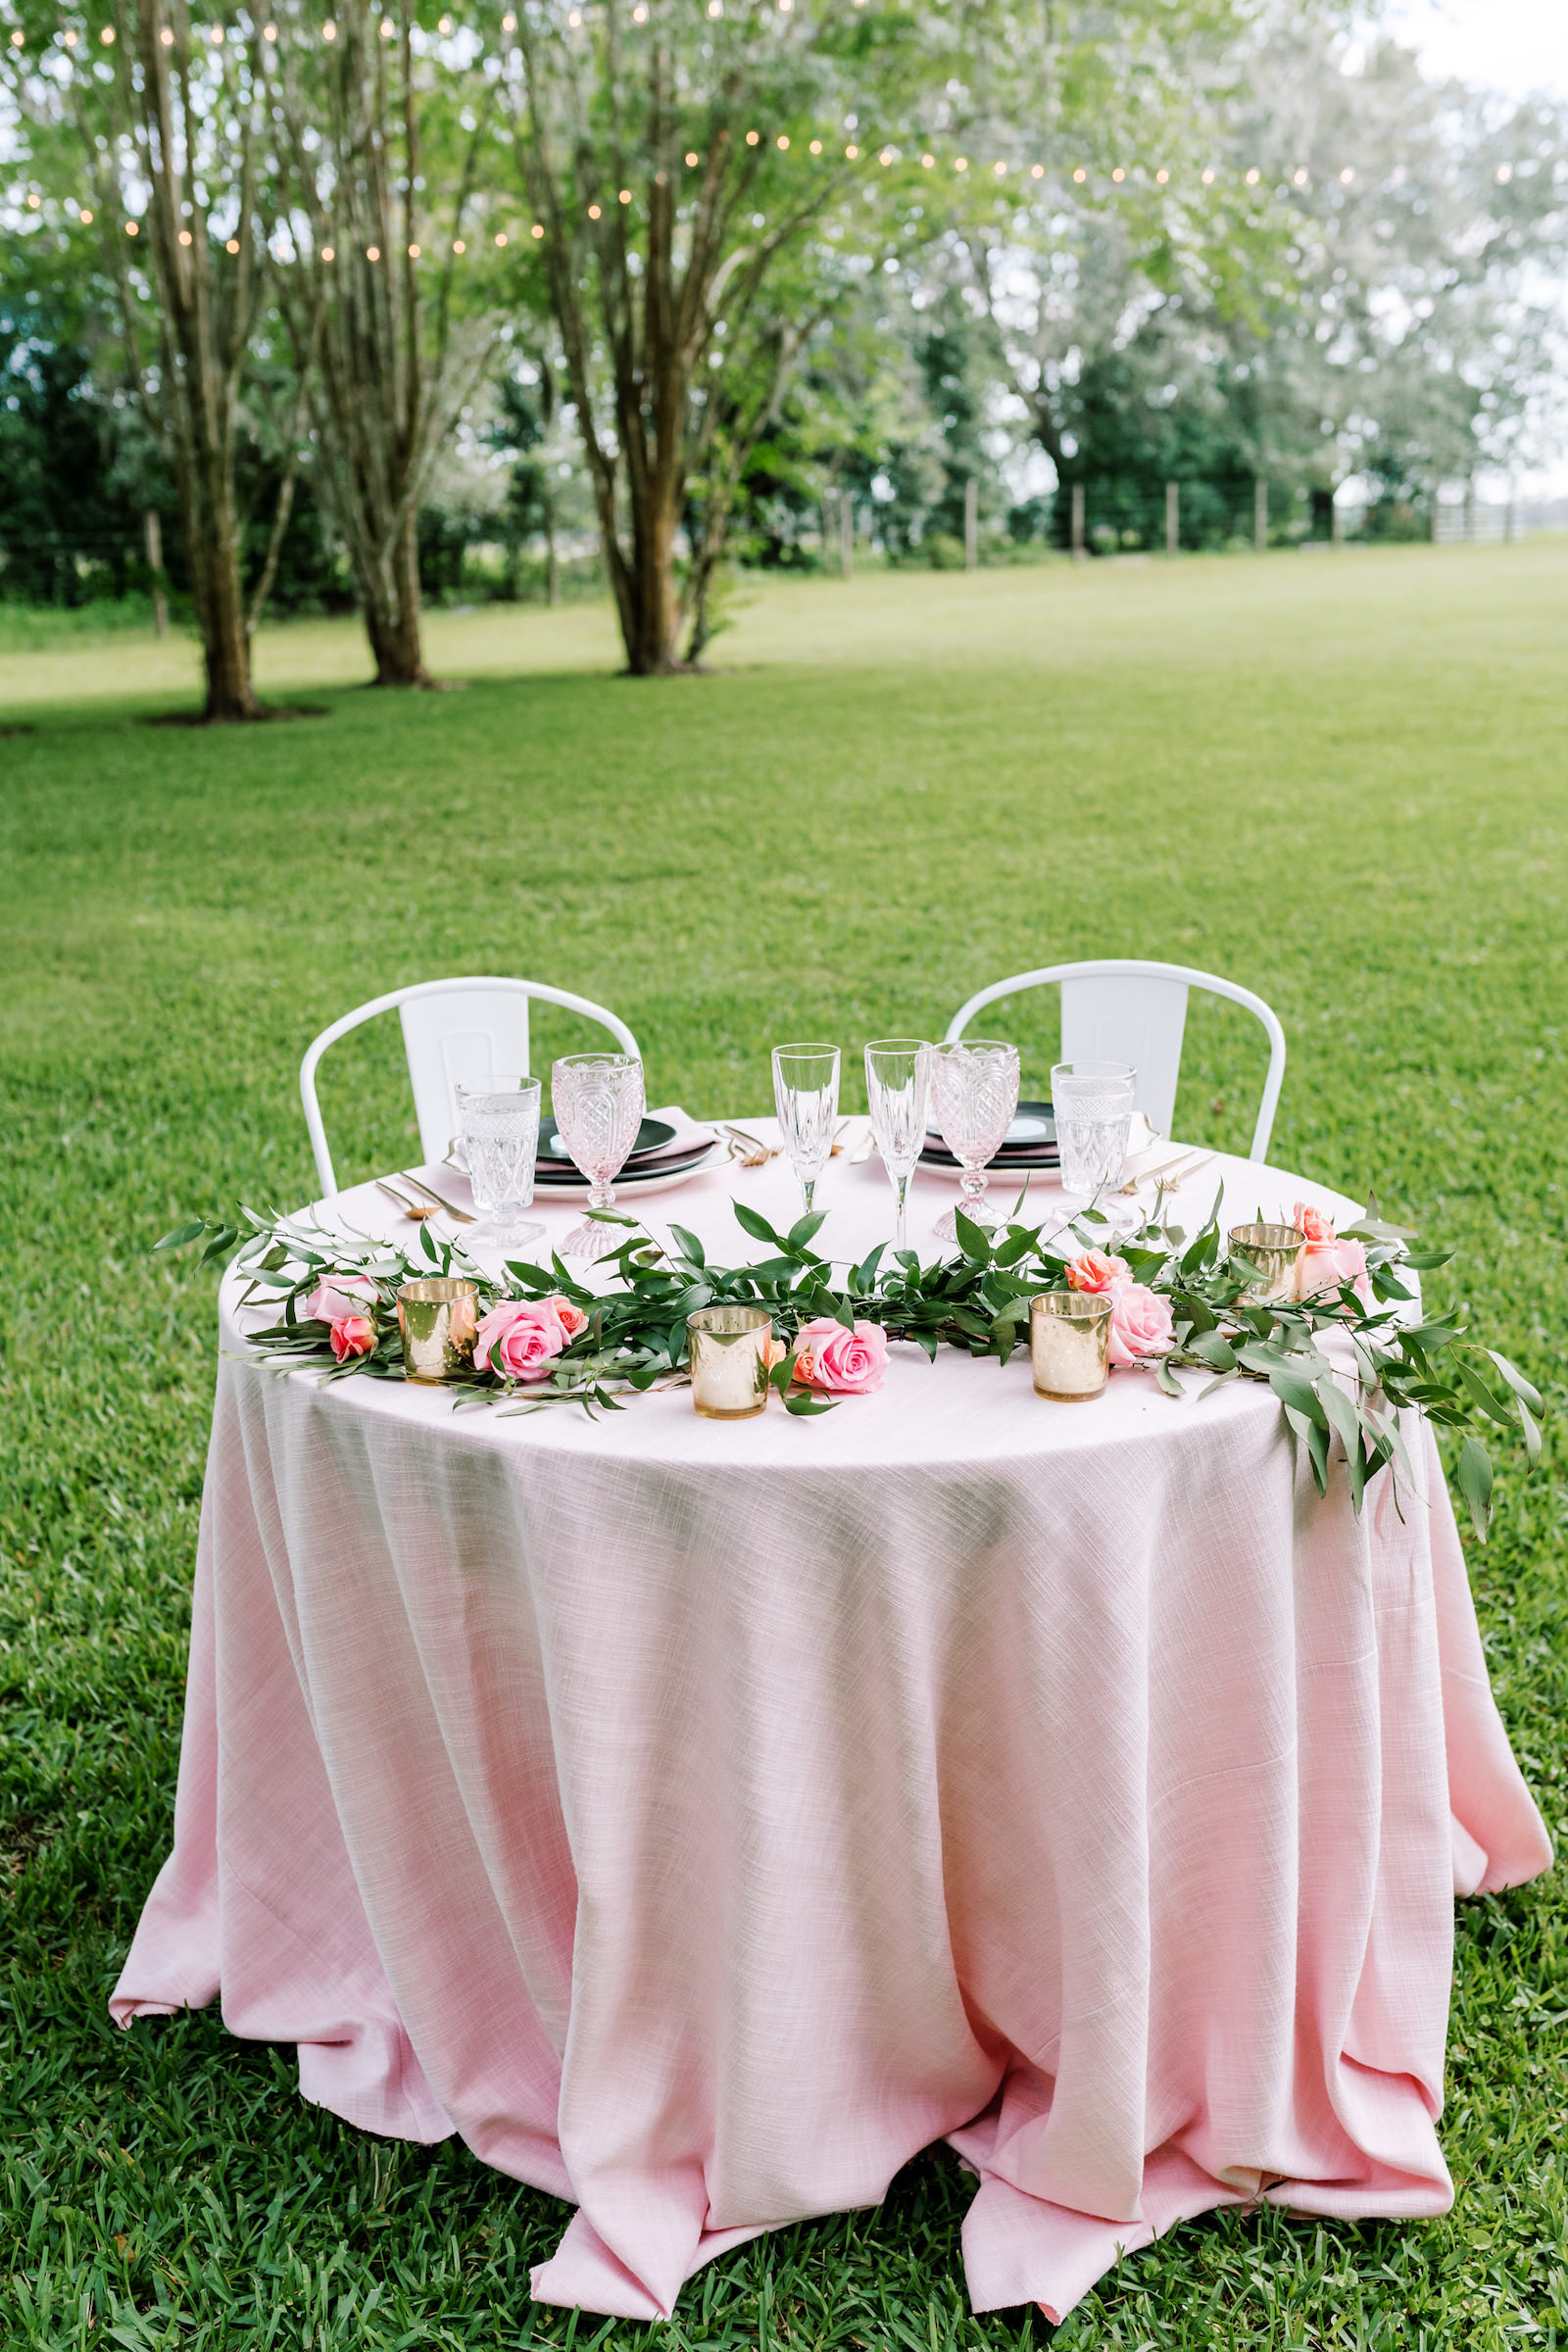 Vintage Inspired Outdoor Florida Wedding Reception, Sweetheart Table with Pink Linens, Magnolia Leaves as Greenery with Bright Pink Roses, Multicolored Goblets with Outdoor String Lighting | Florida Wedding Rentals Over The Top Linen Rentals | Tampa Bay Luxury Wedding Planners EventFull Weddings